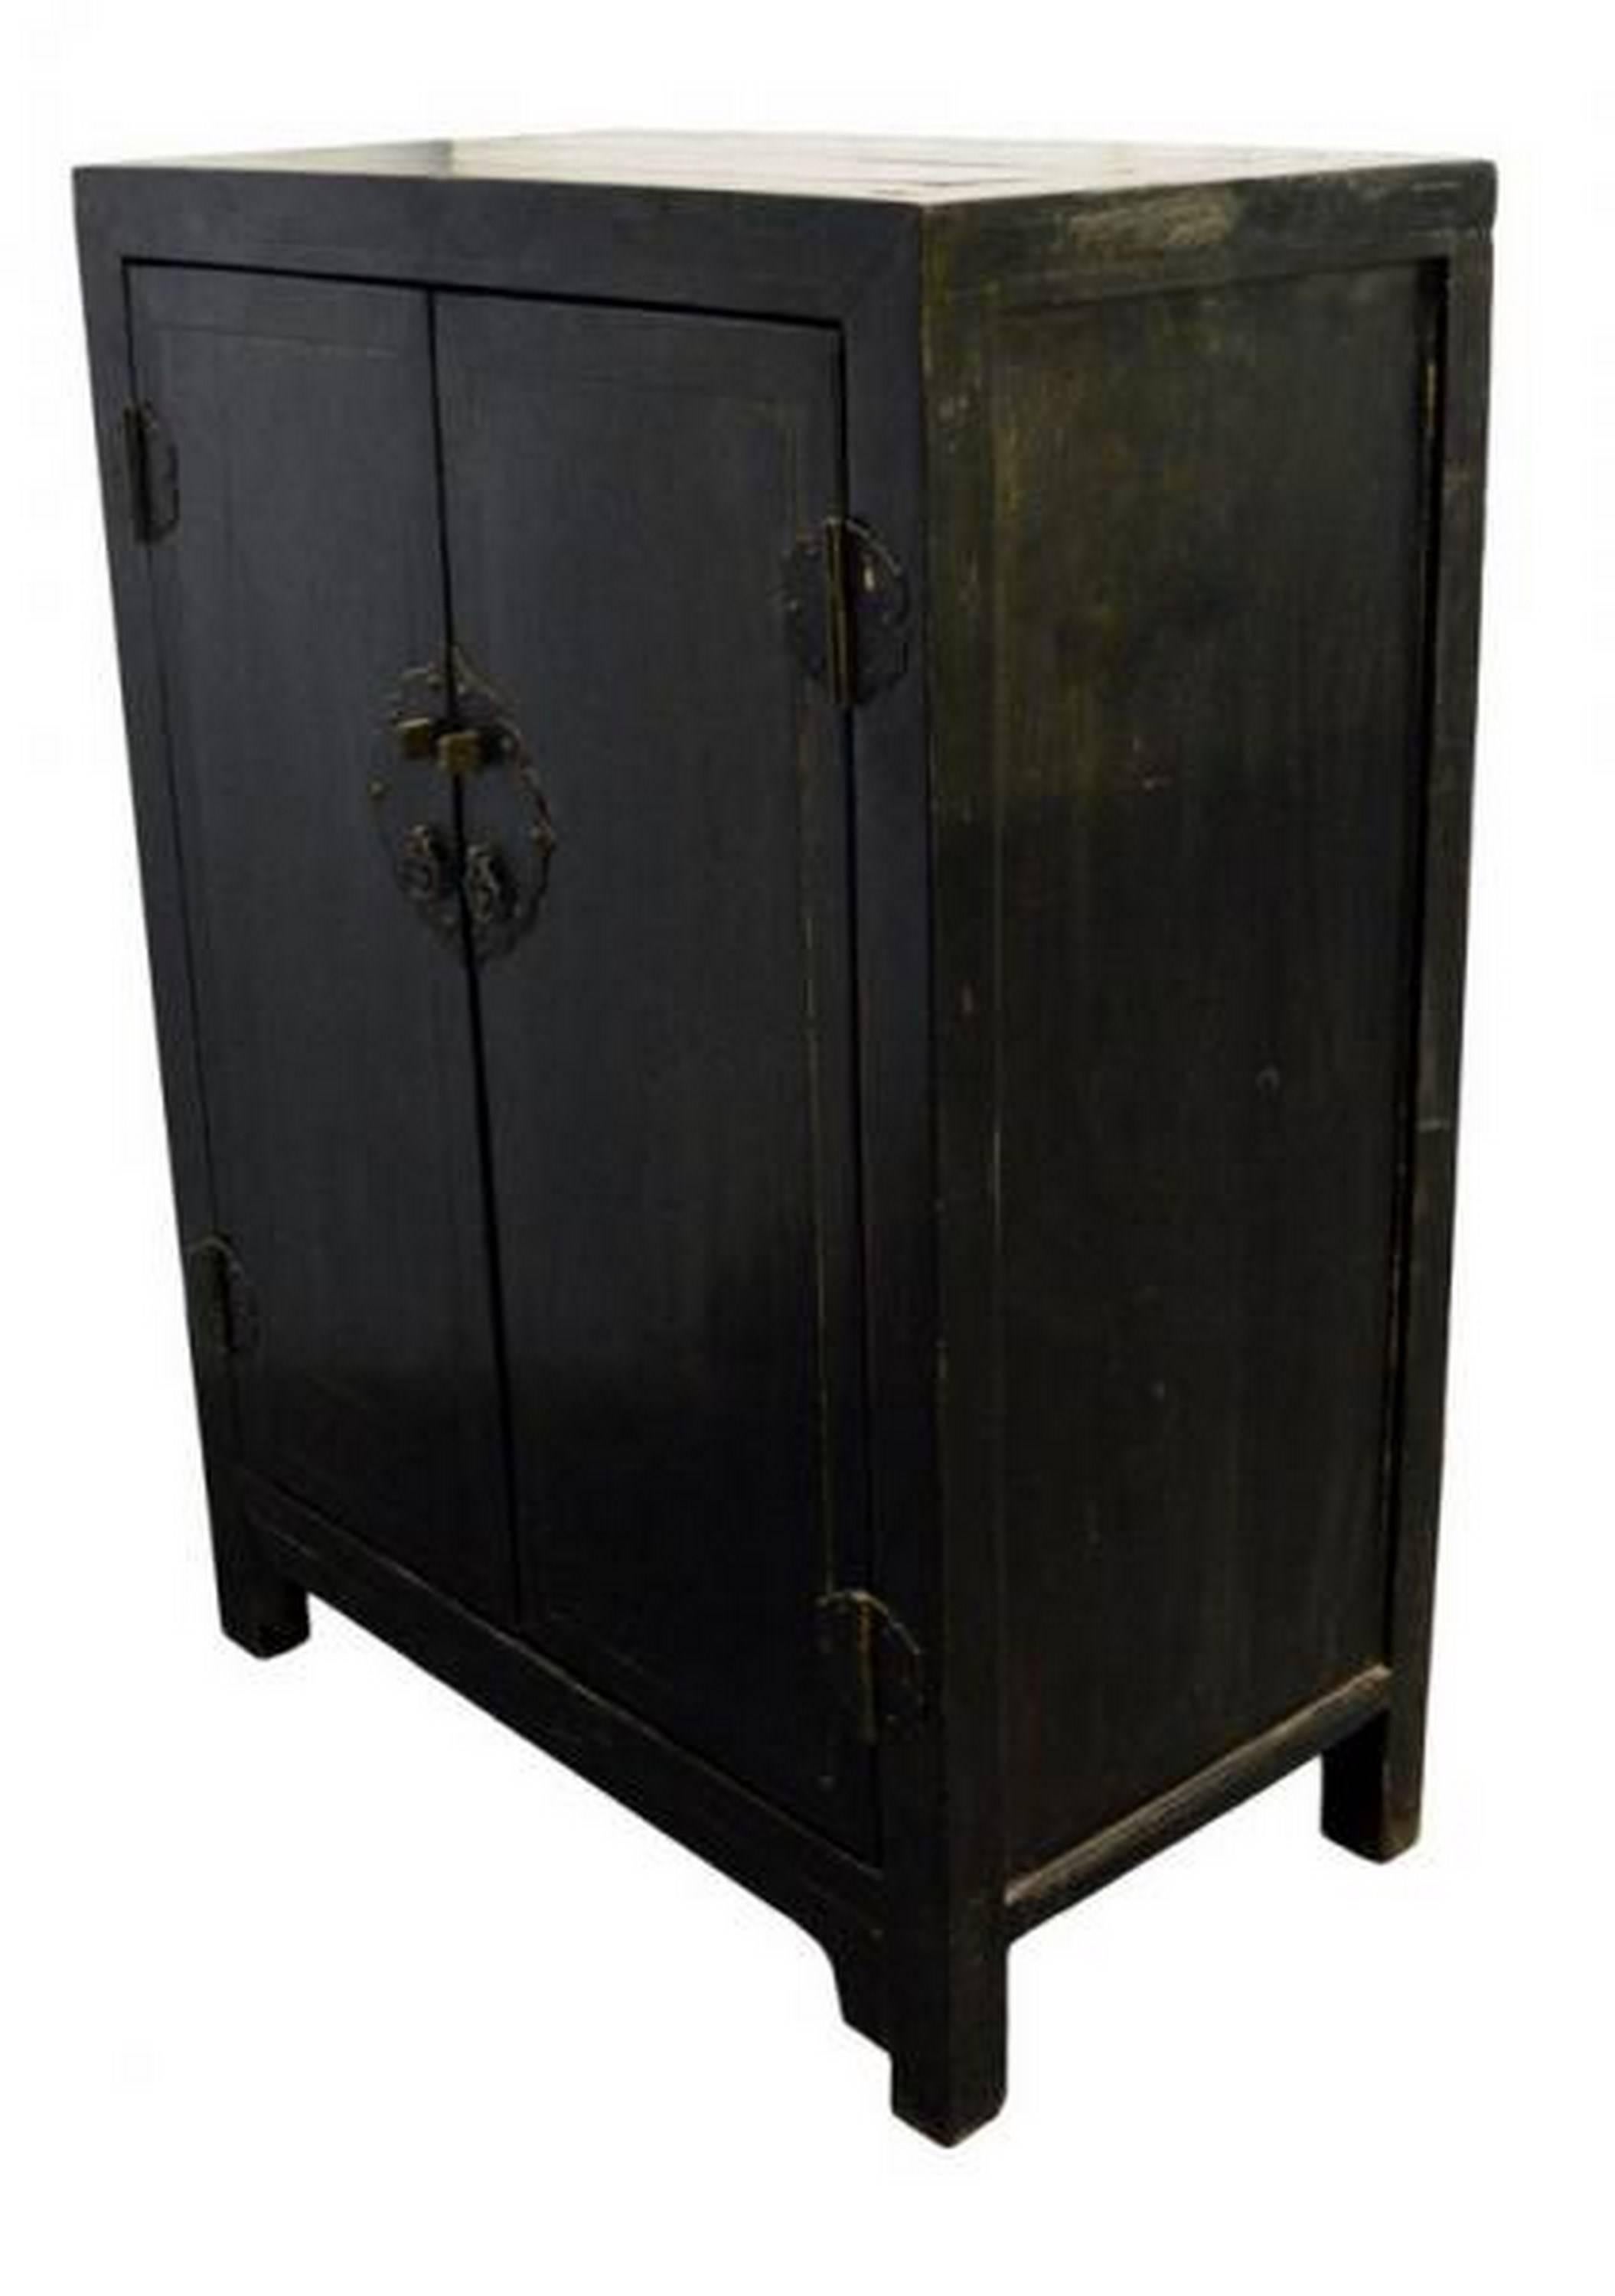 Chinese Antique Black Lacquer Side Cabinet with Brass Hardware from 19th Century China